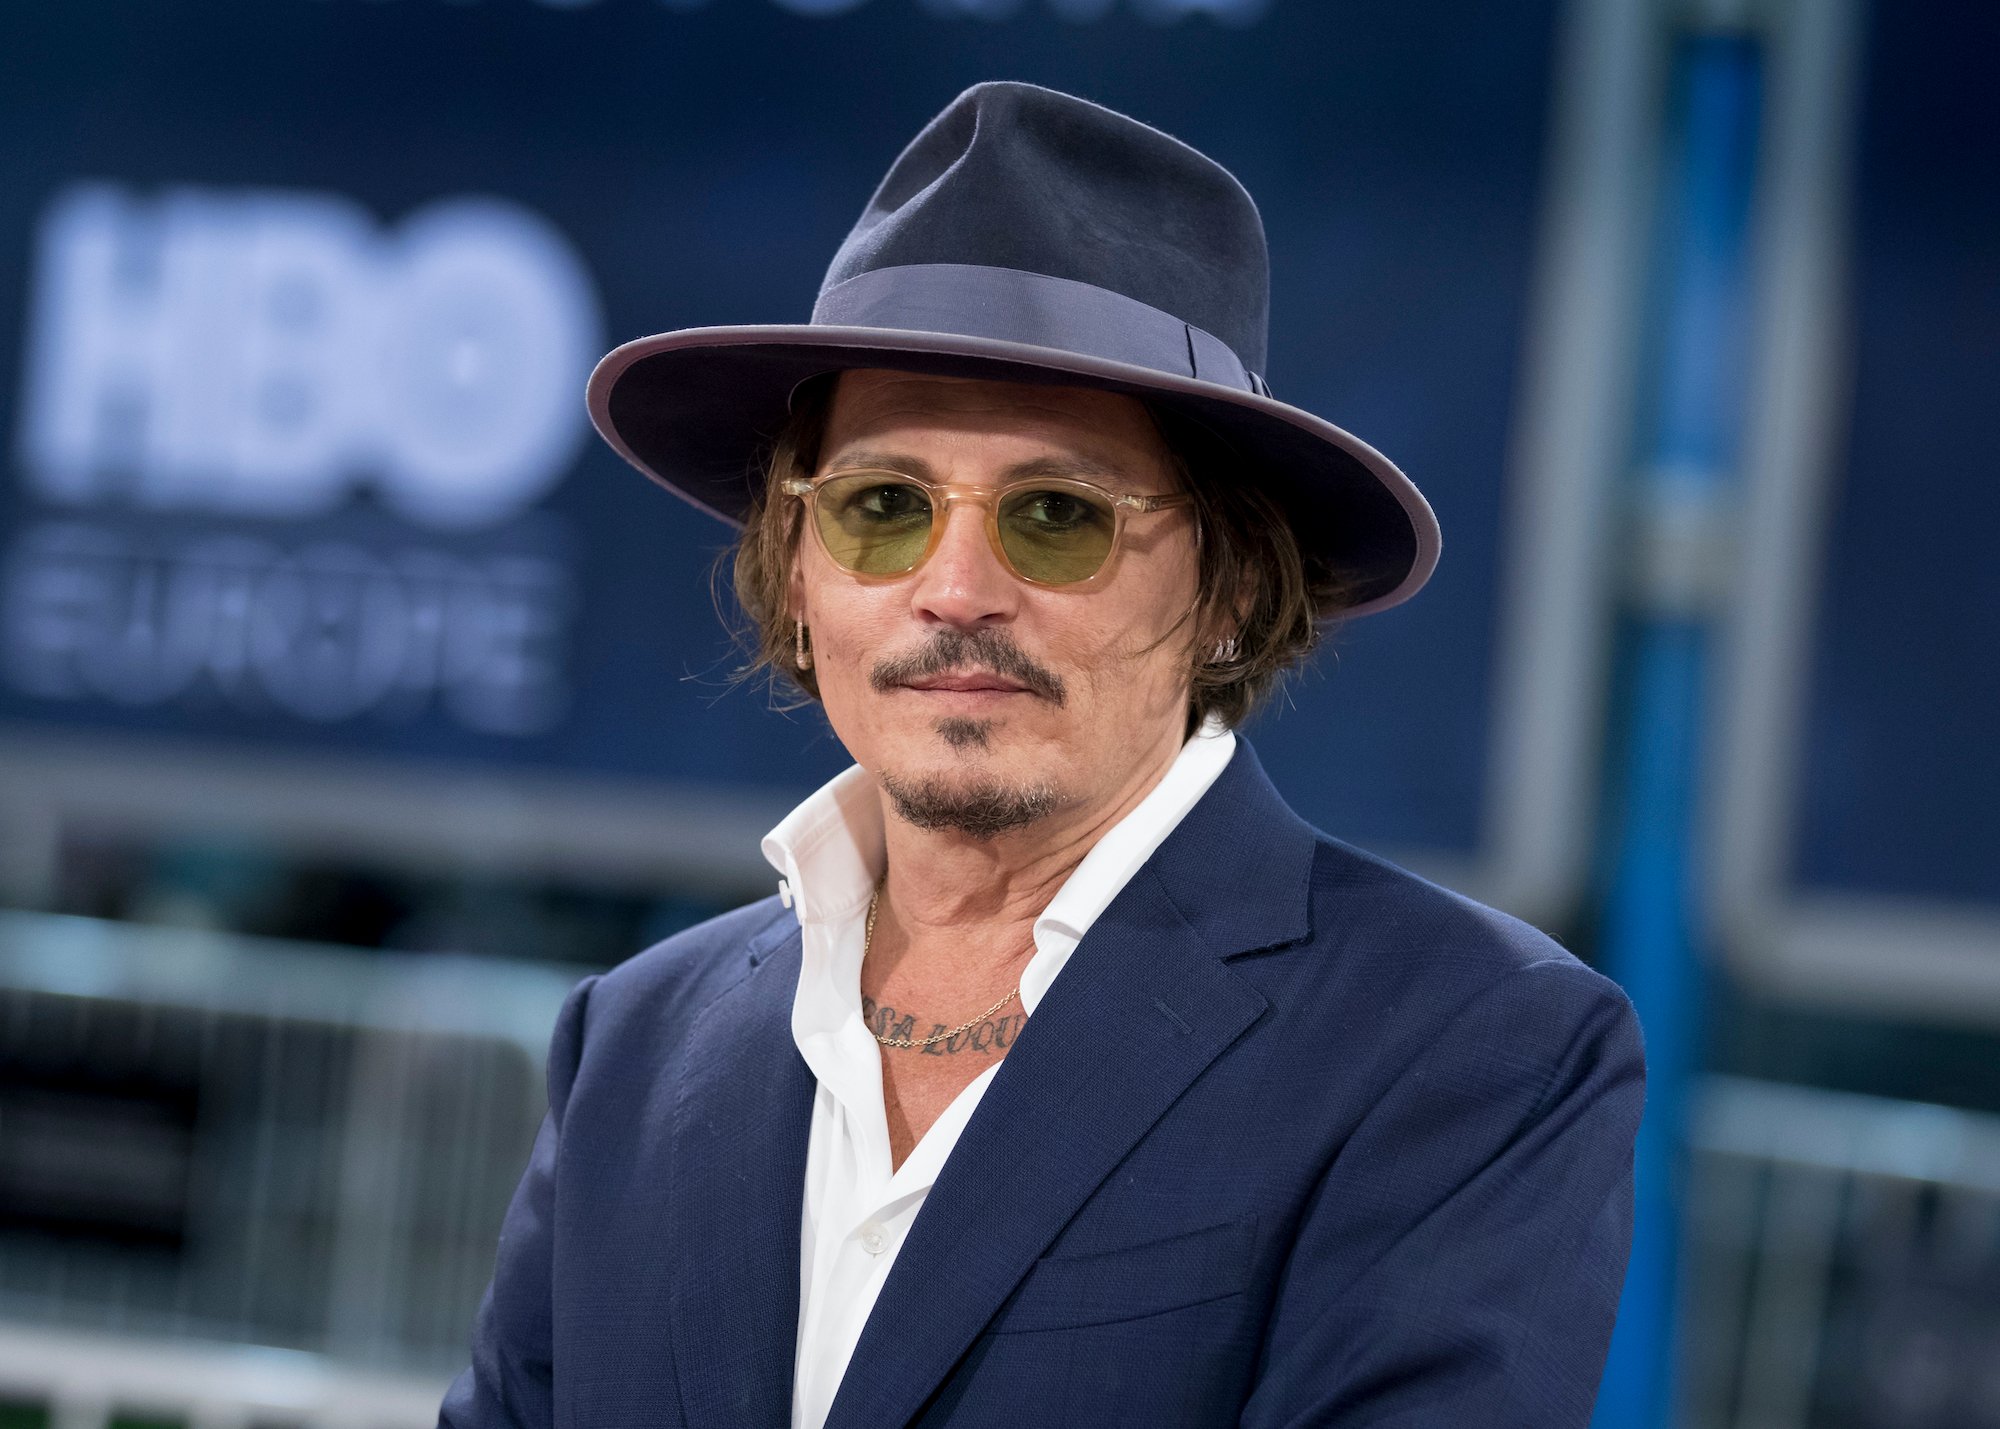 Johnny Depp in a hat and glasses in front of a blurred blue background